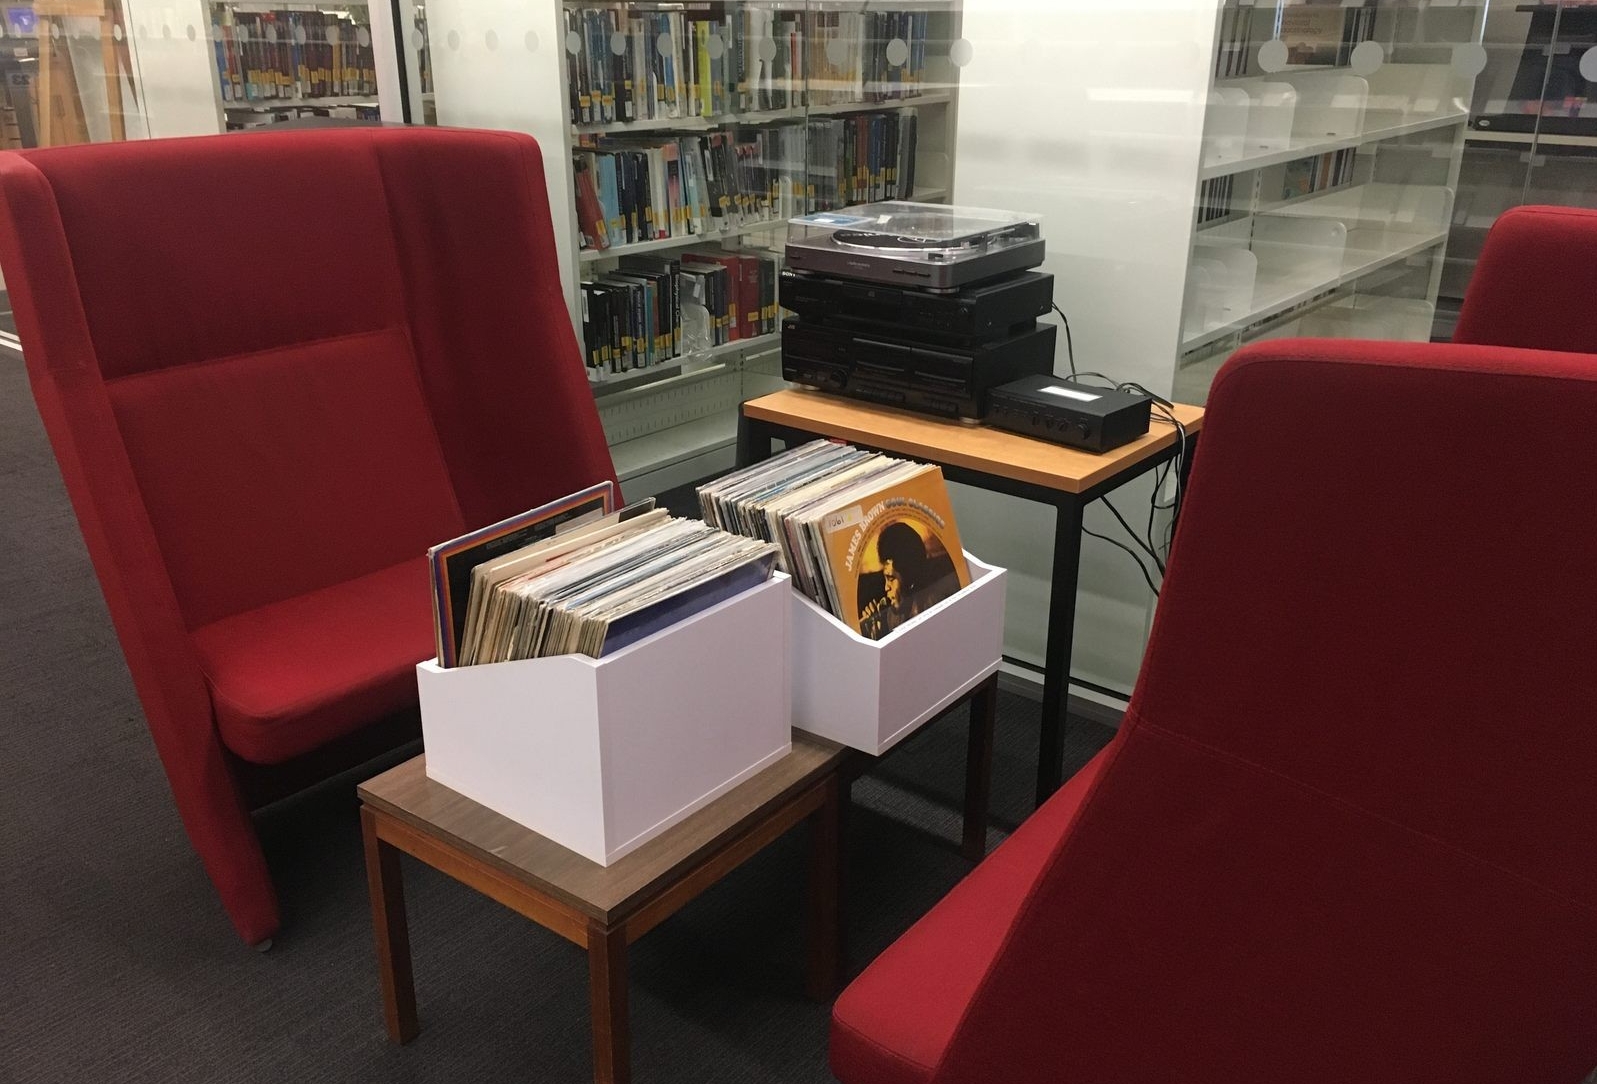 Large red armchairs with a turntable and a box of LPs on a desk, and shelves of books in the background